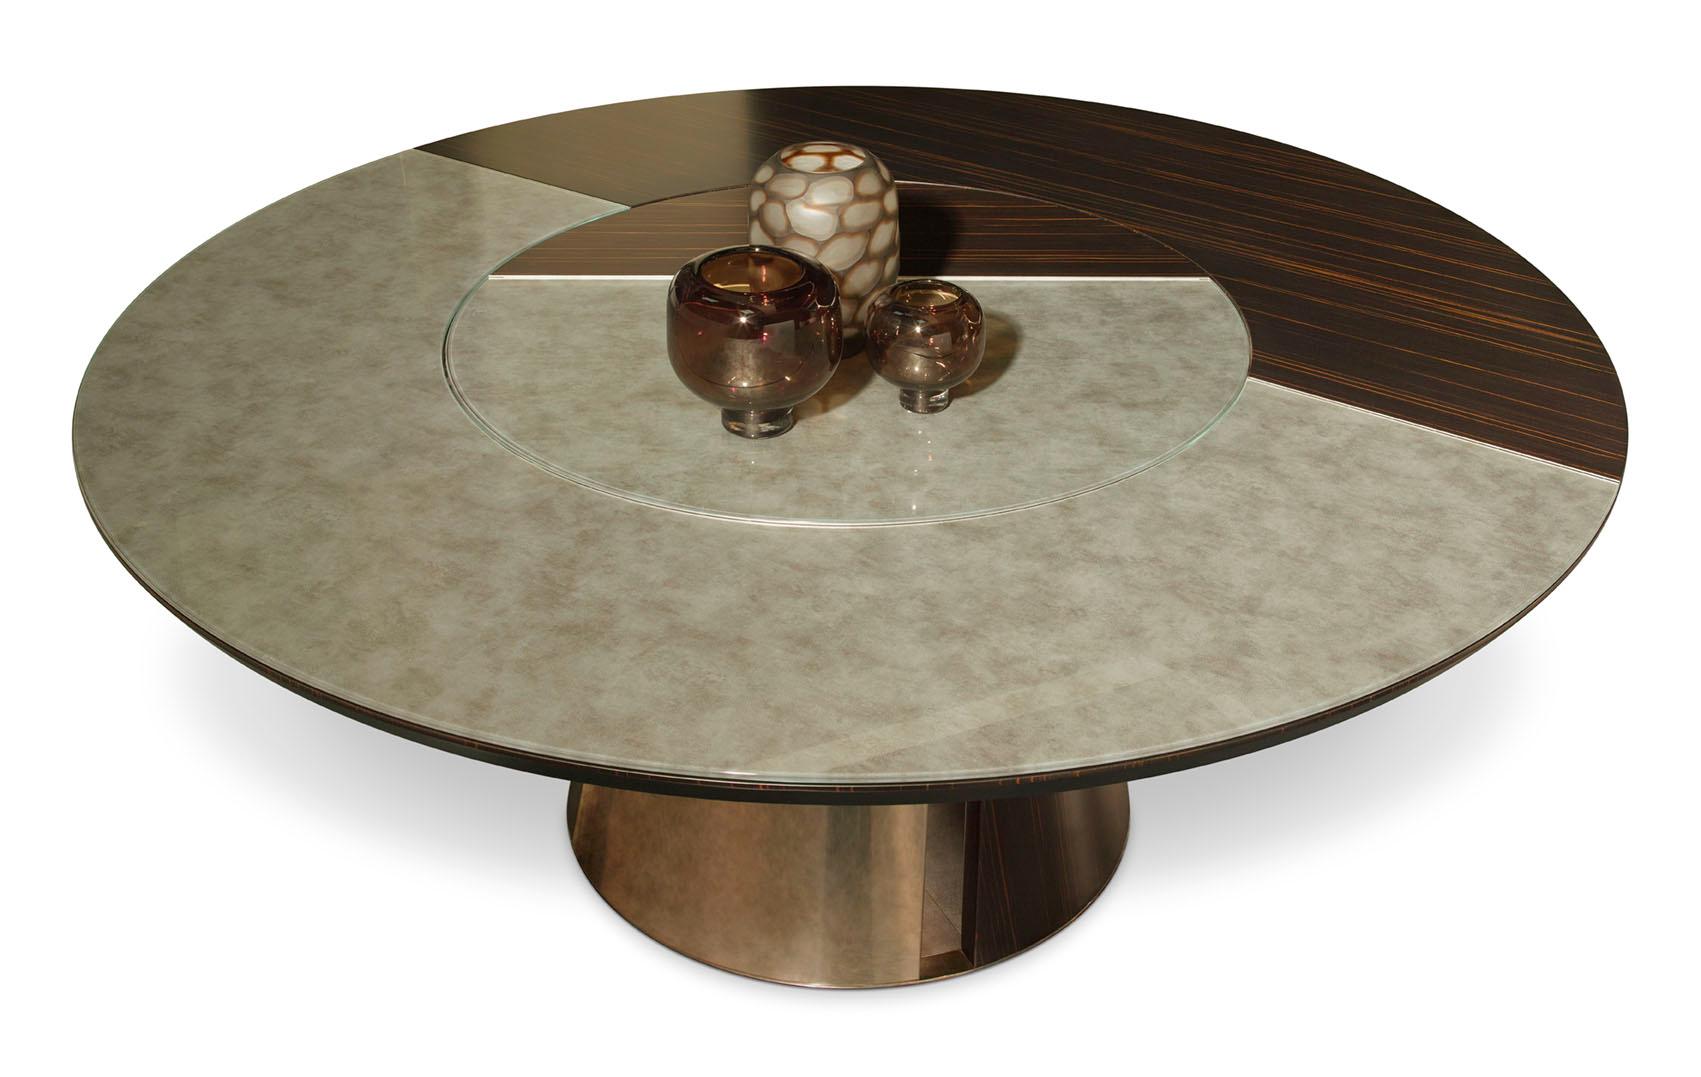 Modern Round Table Metal Frame Legs Glossy or Satin Ebony or Oak Customizable For Sale